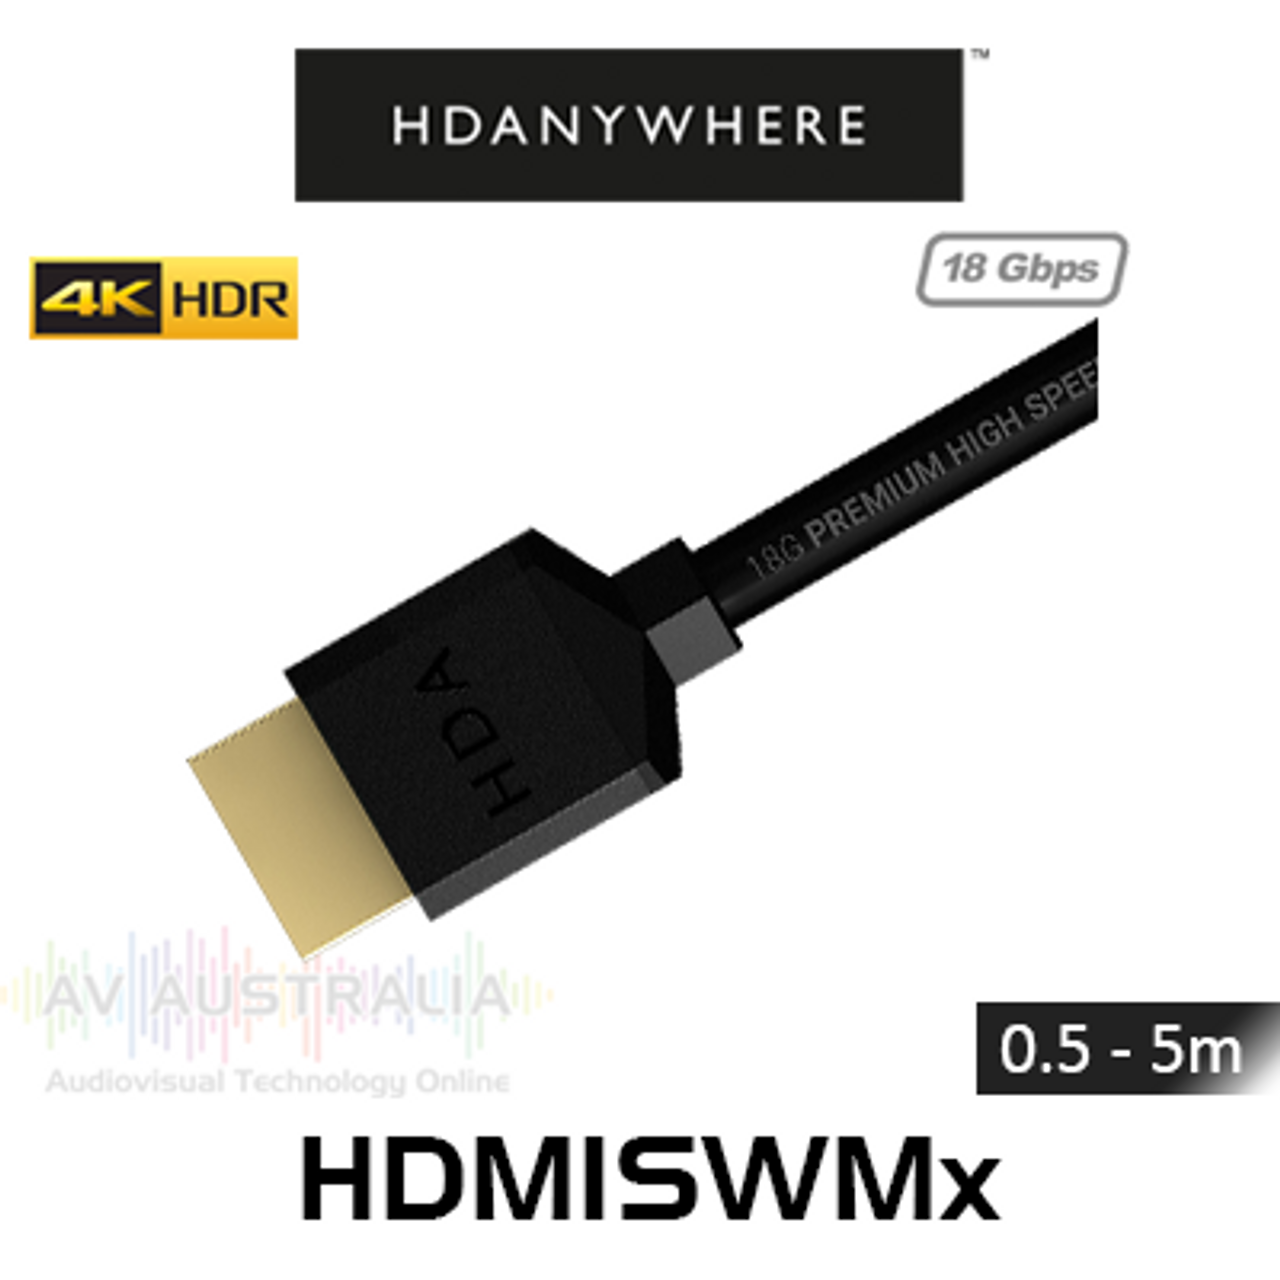 HDAnywhere Slimwire Max 4K 18Gbps HDMI Cables (0.5-5m)